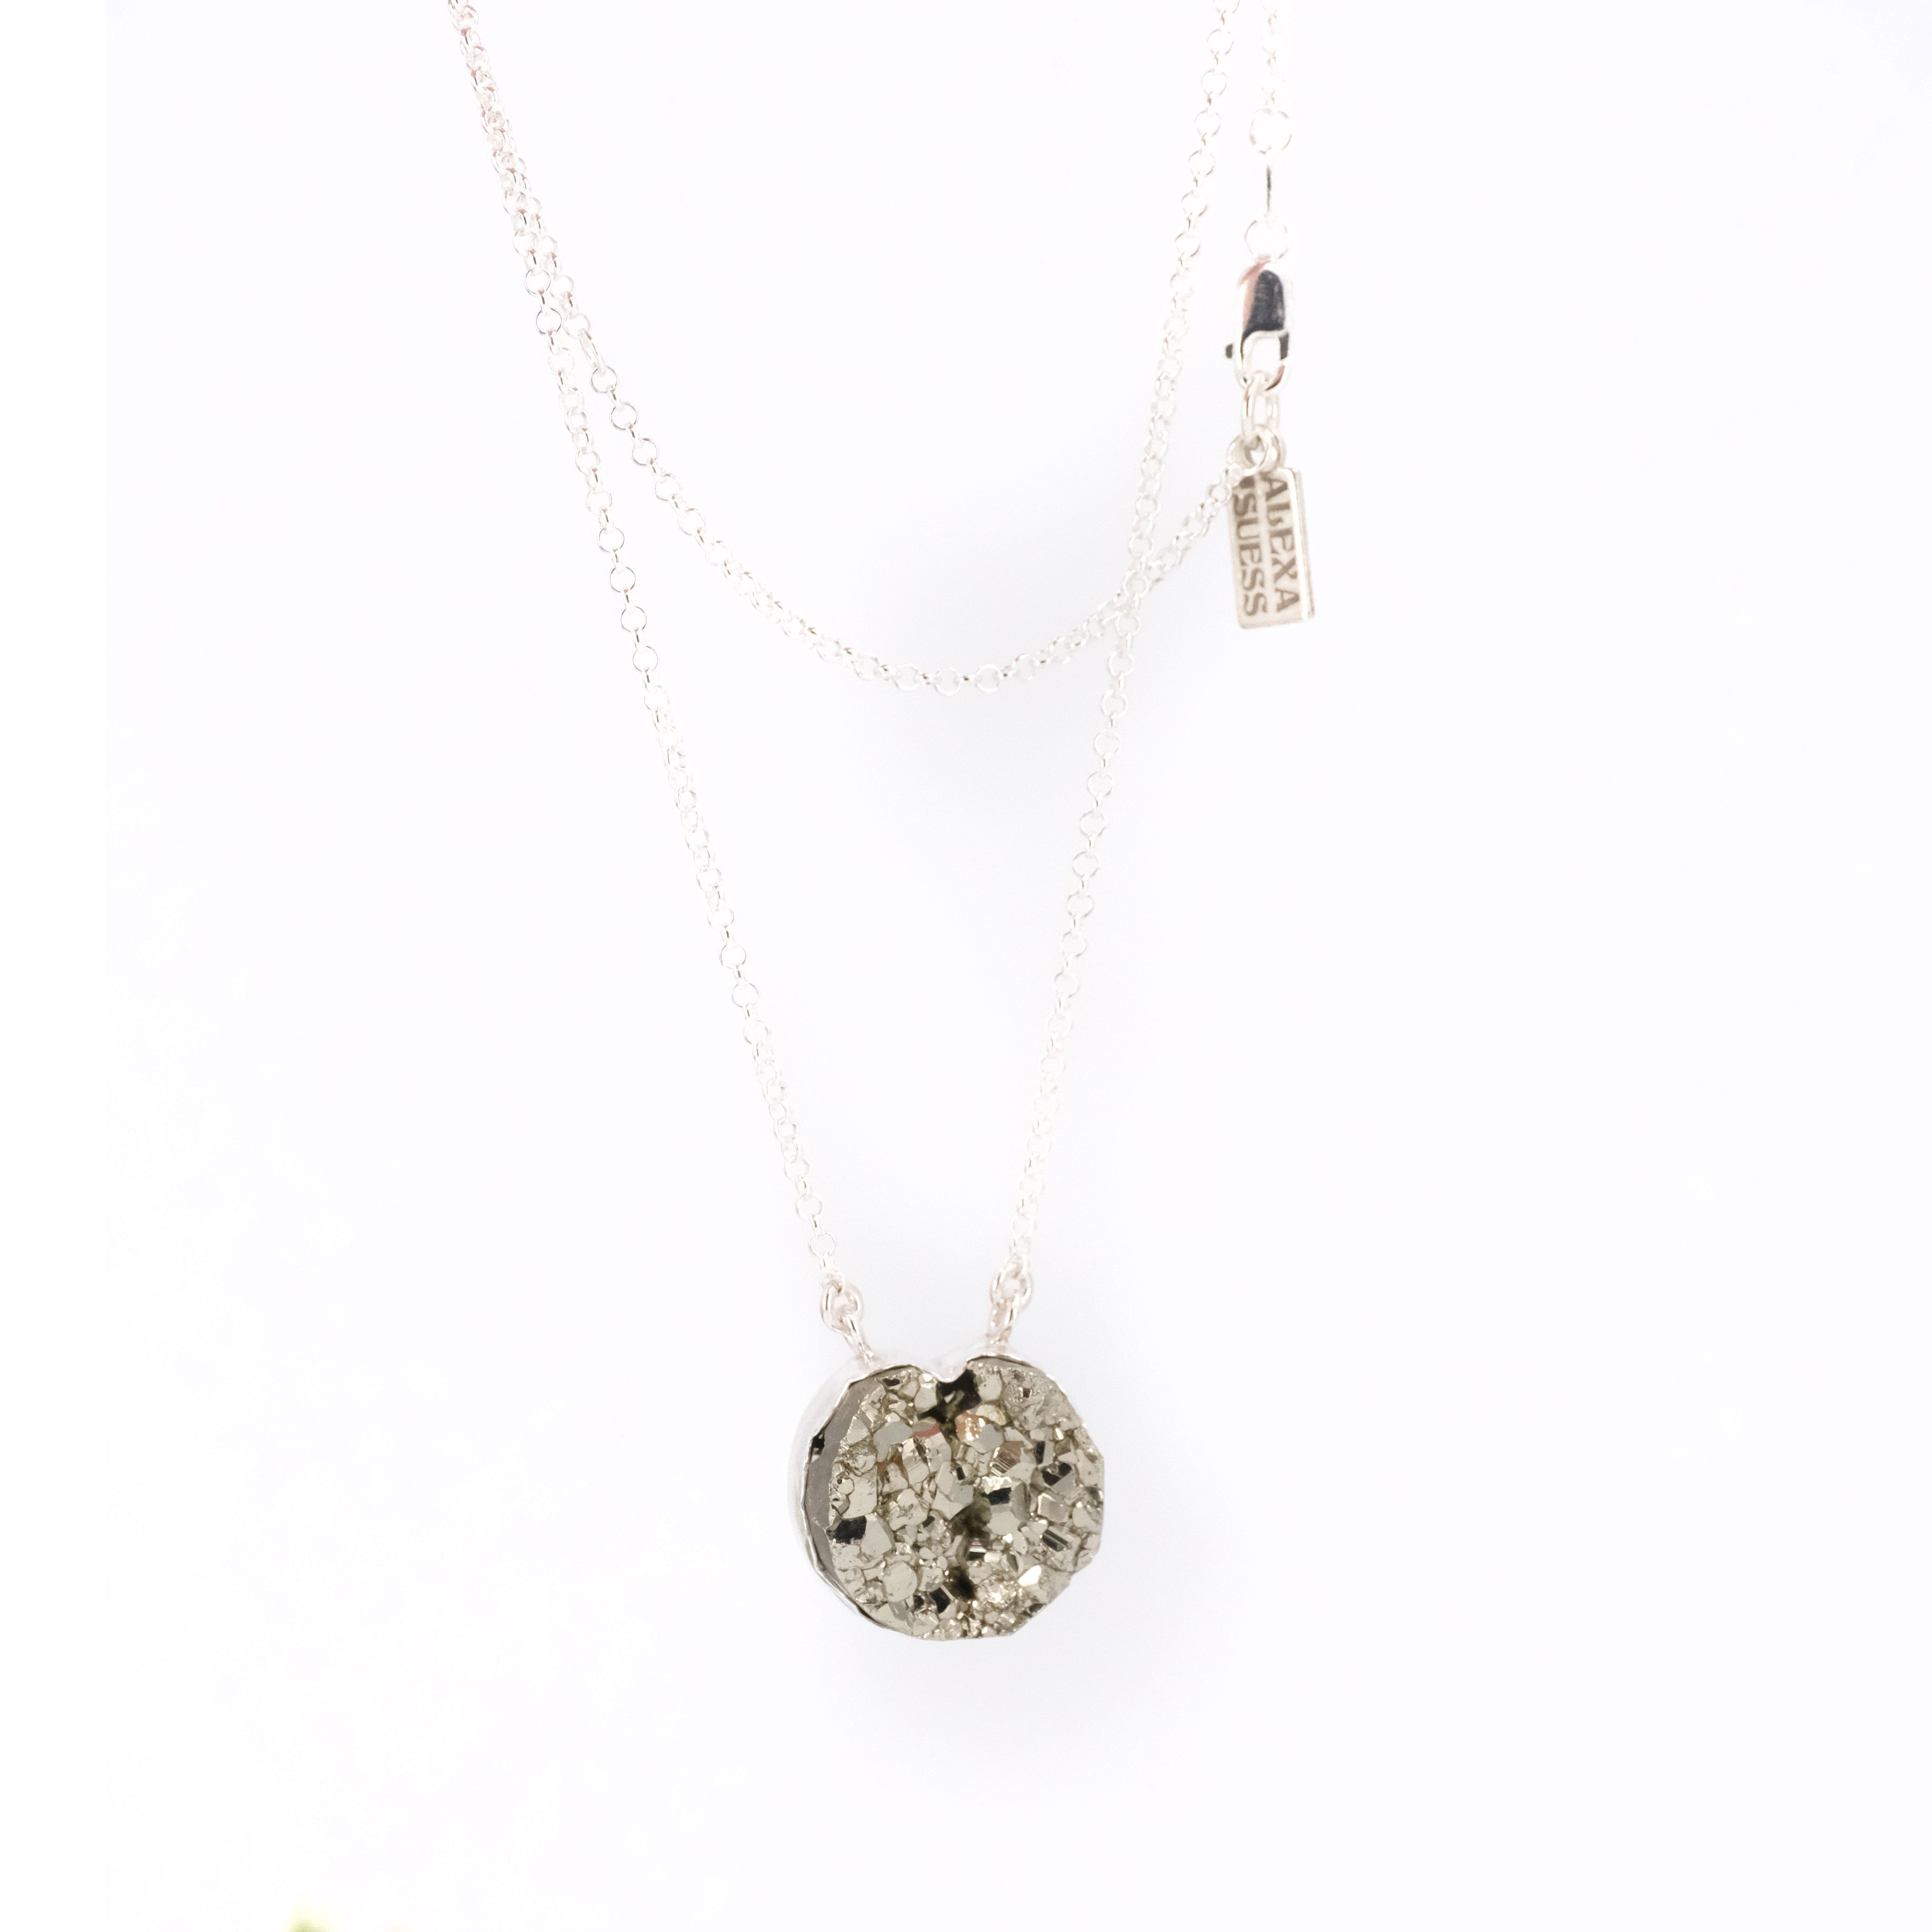 Pyrite Crevasse Necklace - One of a Kind